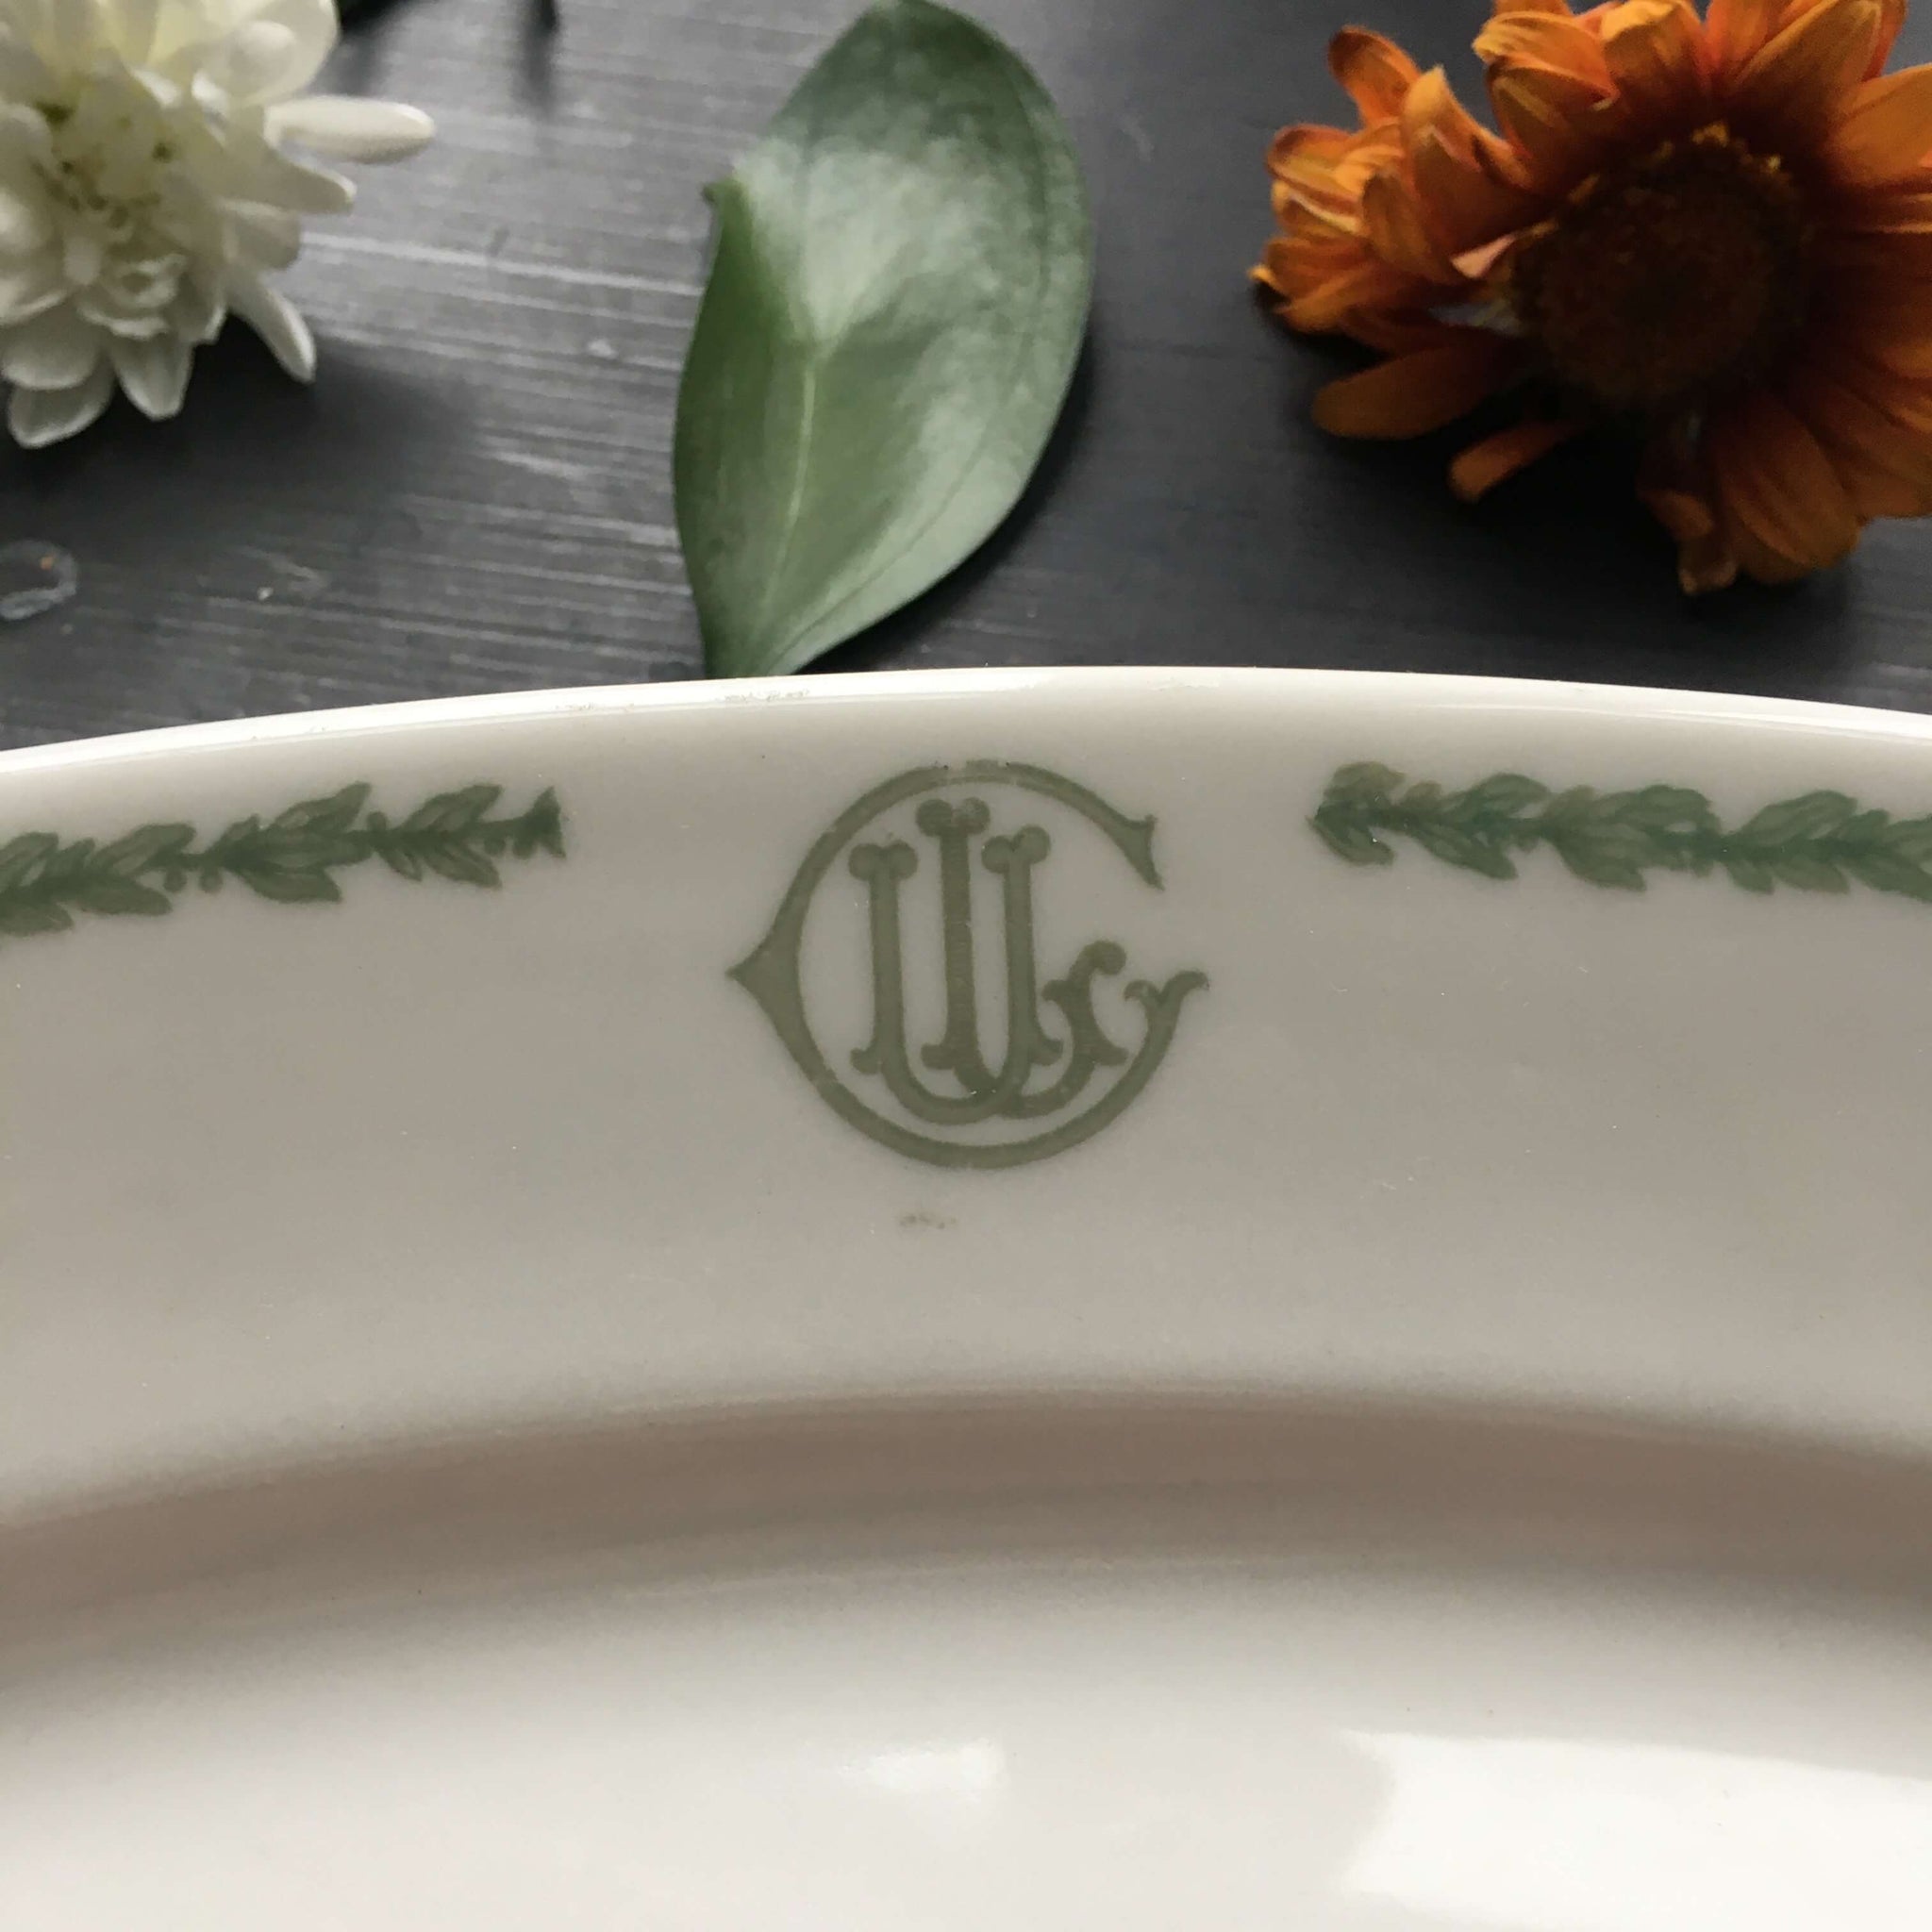 Vintage Union League Club Platter Made by Lamberton China - Furnished By Albert Pick & Company